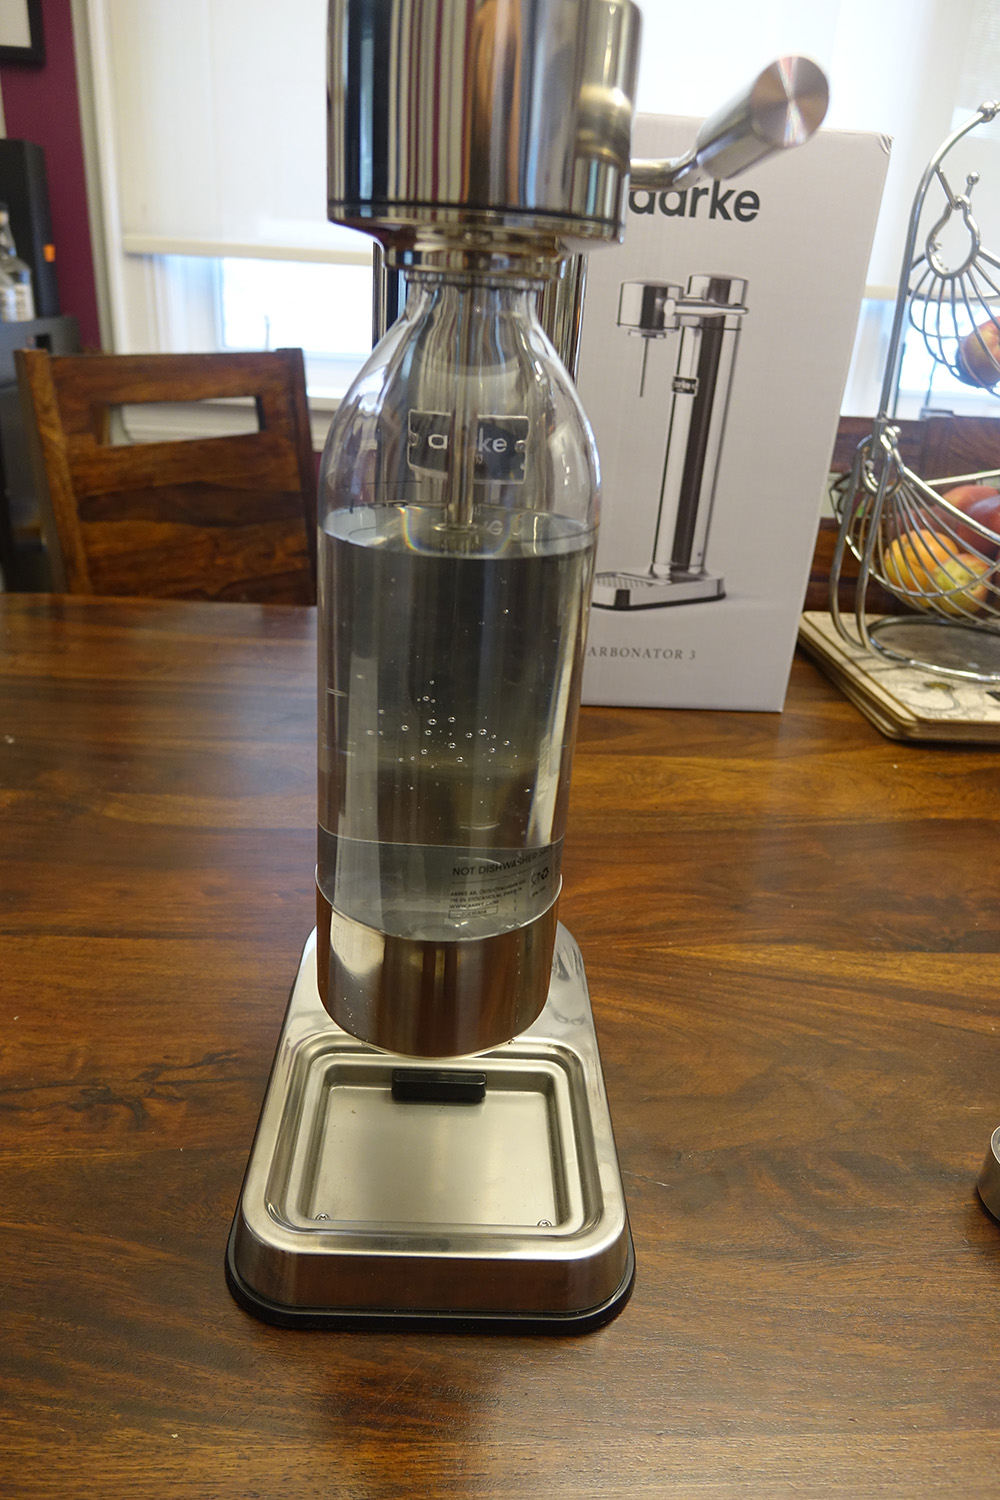 Aarke Carbonator III Carbonated Water Maker Full Review: Worth it? 